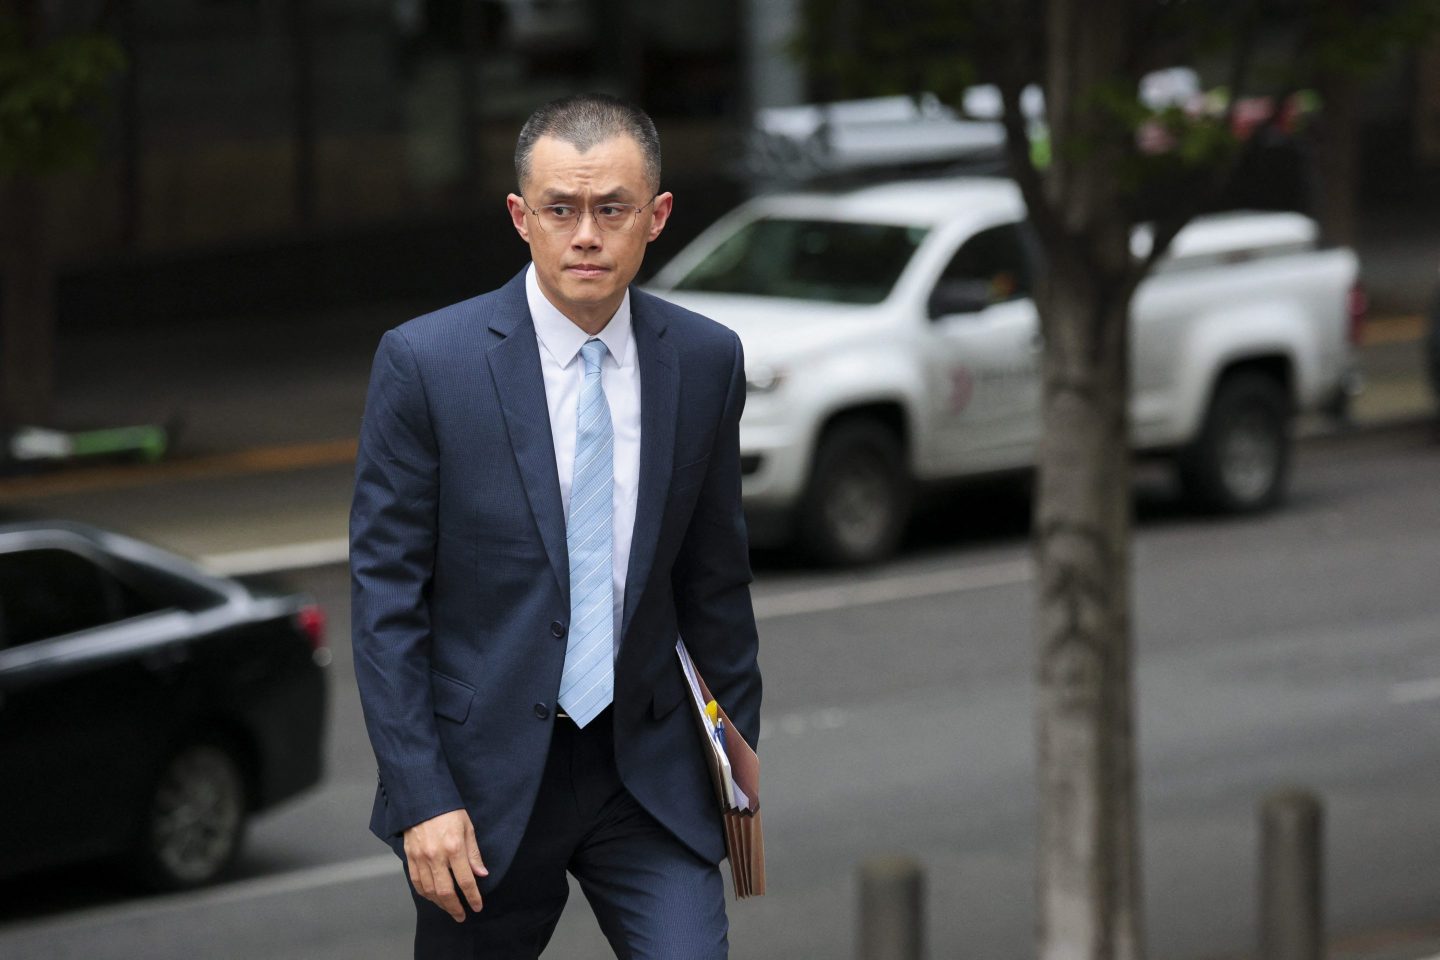 Former Binance CEO Changpeng &#8220;CZ&#8221; Zhao arrives at federal court in Seattle, Washington, on April 30, 2024. Changpeng Zhao, the founder and former chief executive of Binance, the world&#8217;s largest cryptocurrency exchange, was sentenced today to four months in prison after he pleaded guilty to violating laws against money laundering. (Photo by Jason Redmond / AFP) (Photo by JASON REDMOND/AFP via Getty Images)